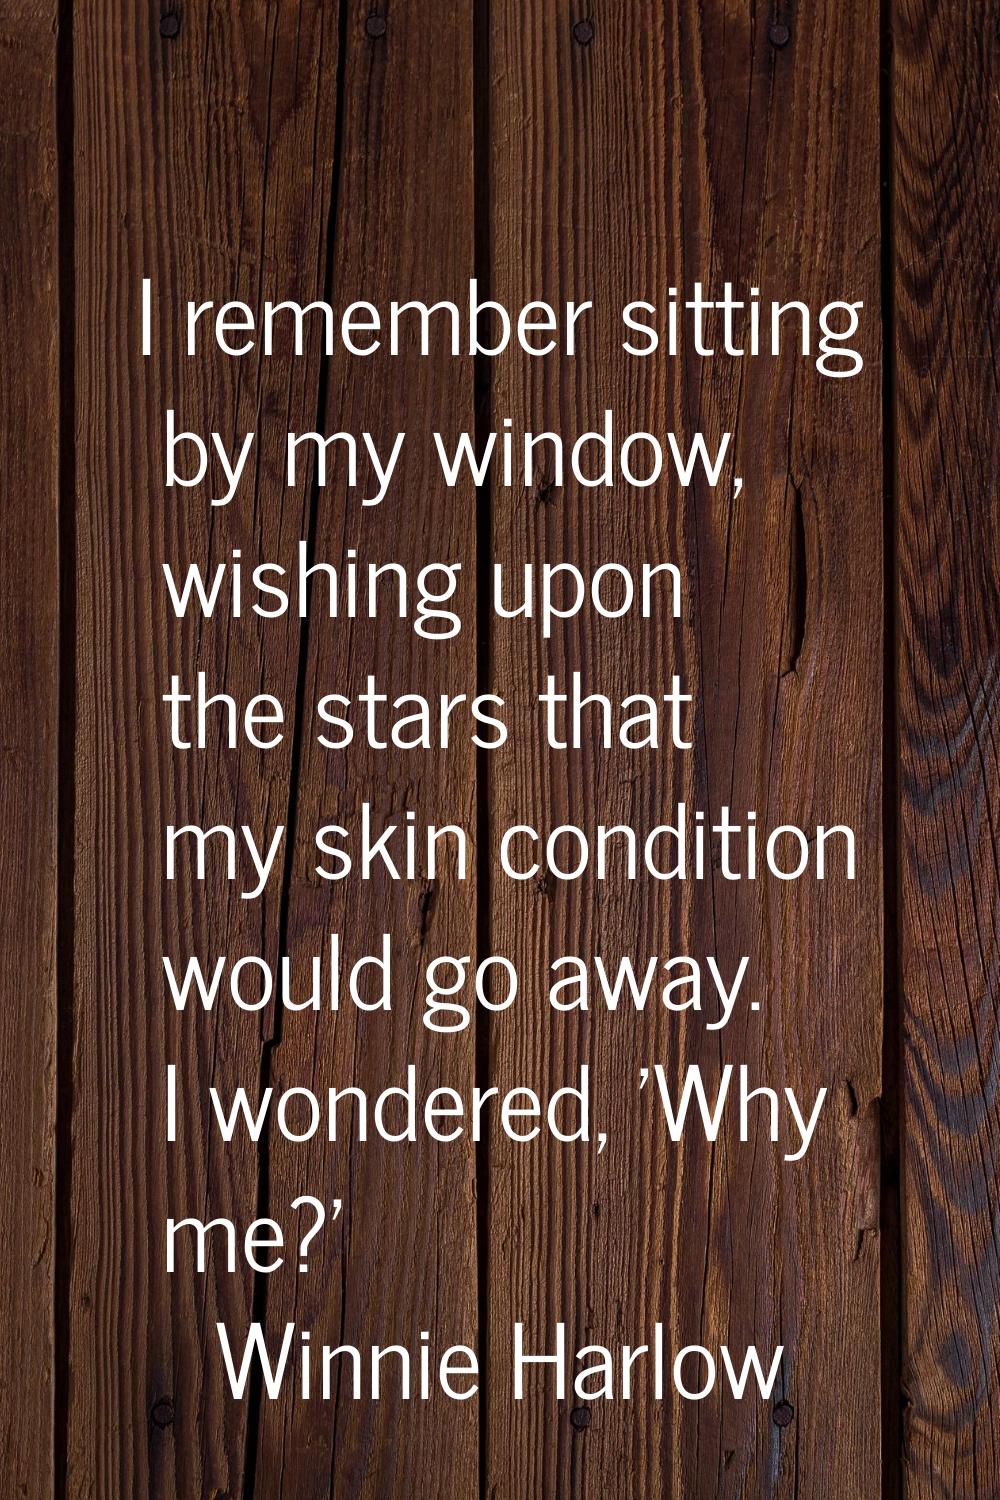 I remember sitting by my window, wishing upon the stars that my skin condition would go away. I won